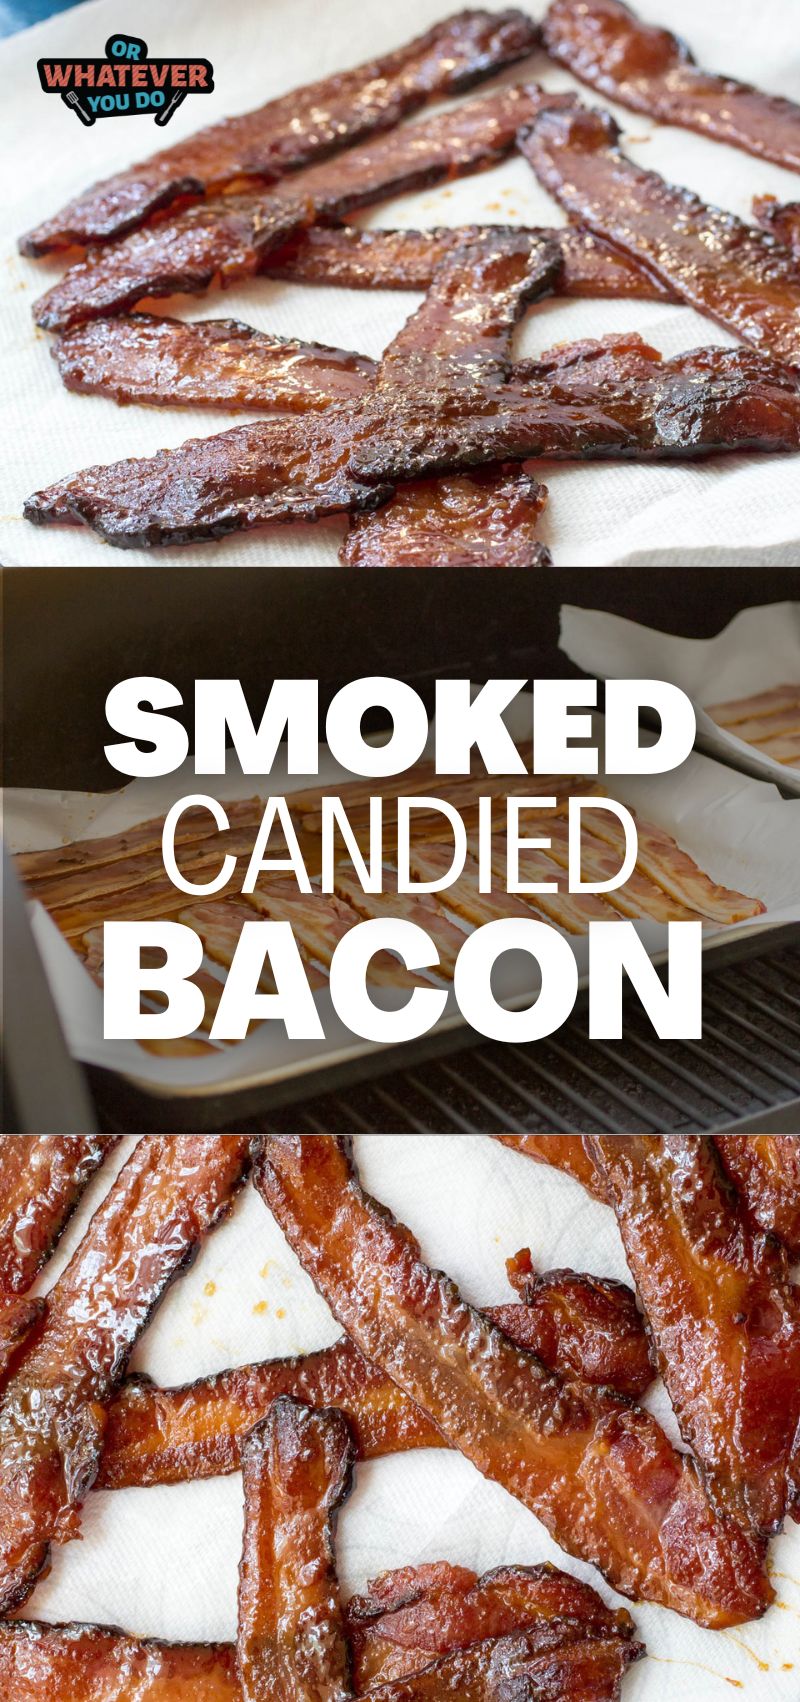 Smoked Candied Bacon